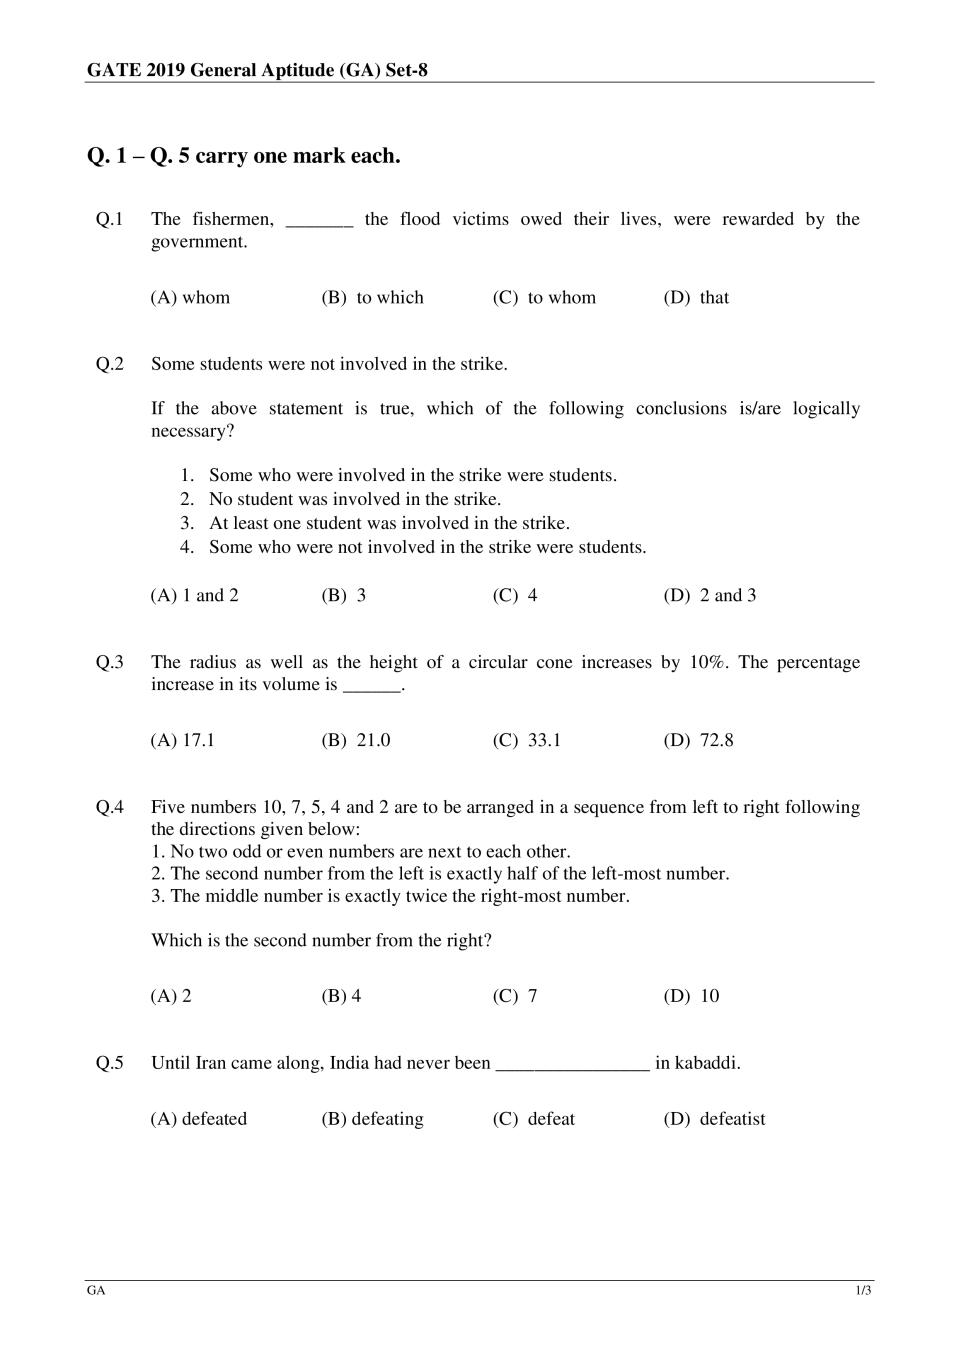 GATE 2019 Architecture and Planning (AR) Question Paper with Answer - Page 1